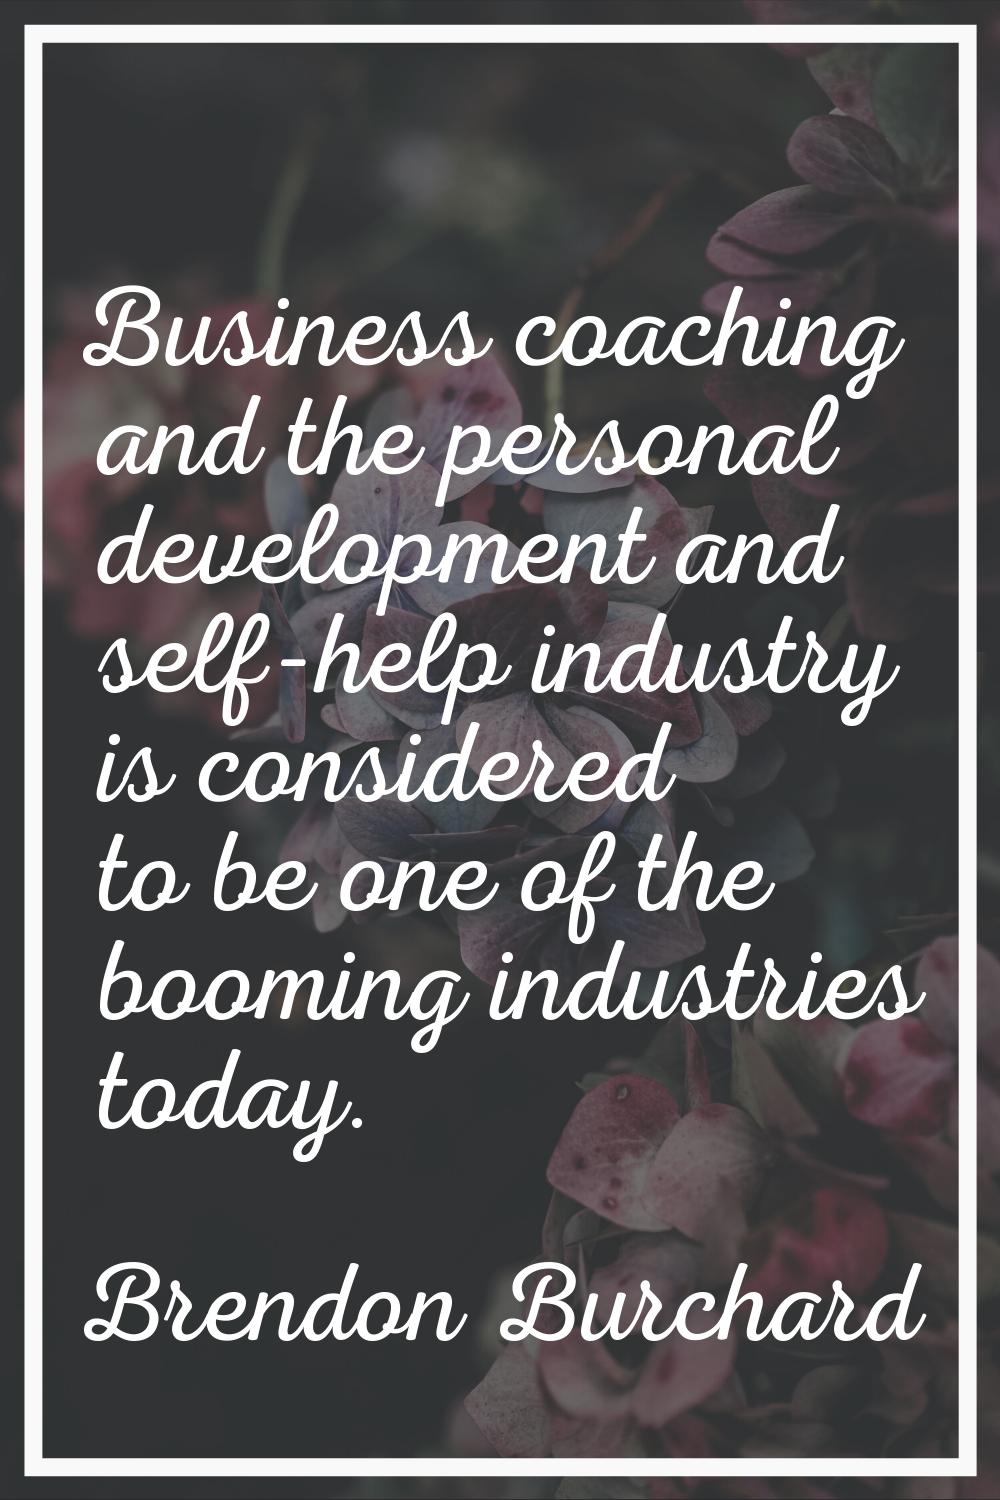 Business coaching and the personal development and self-help industry is considered to be one of th